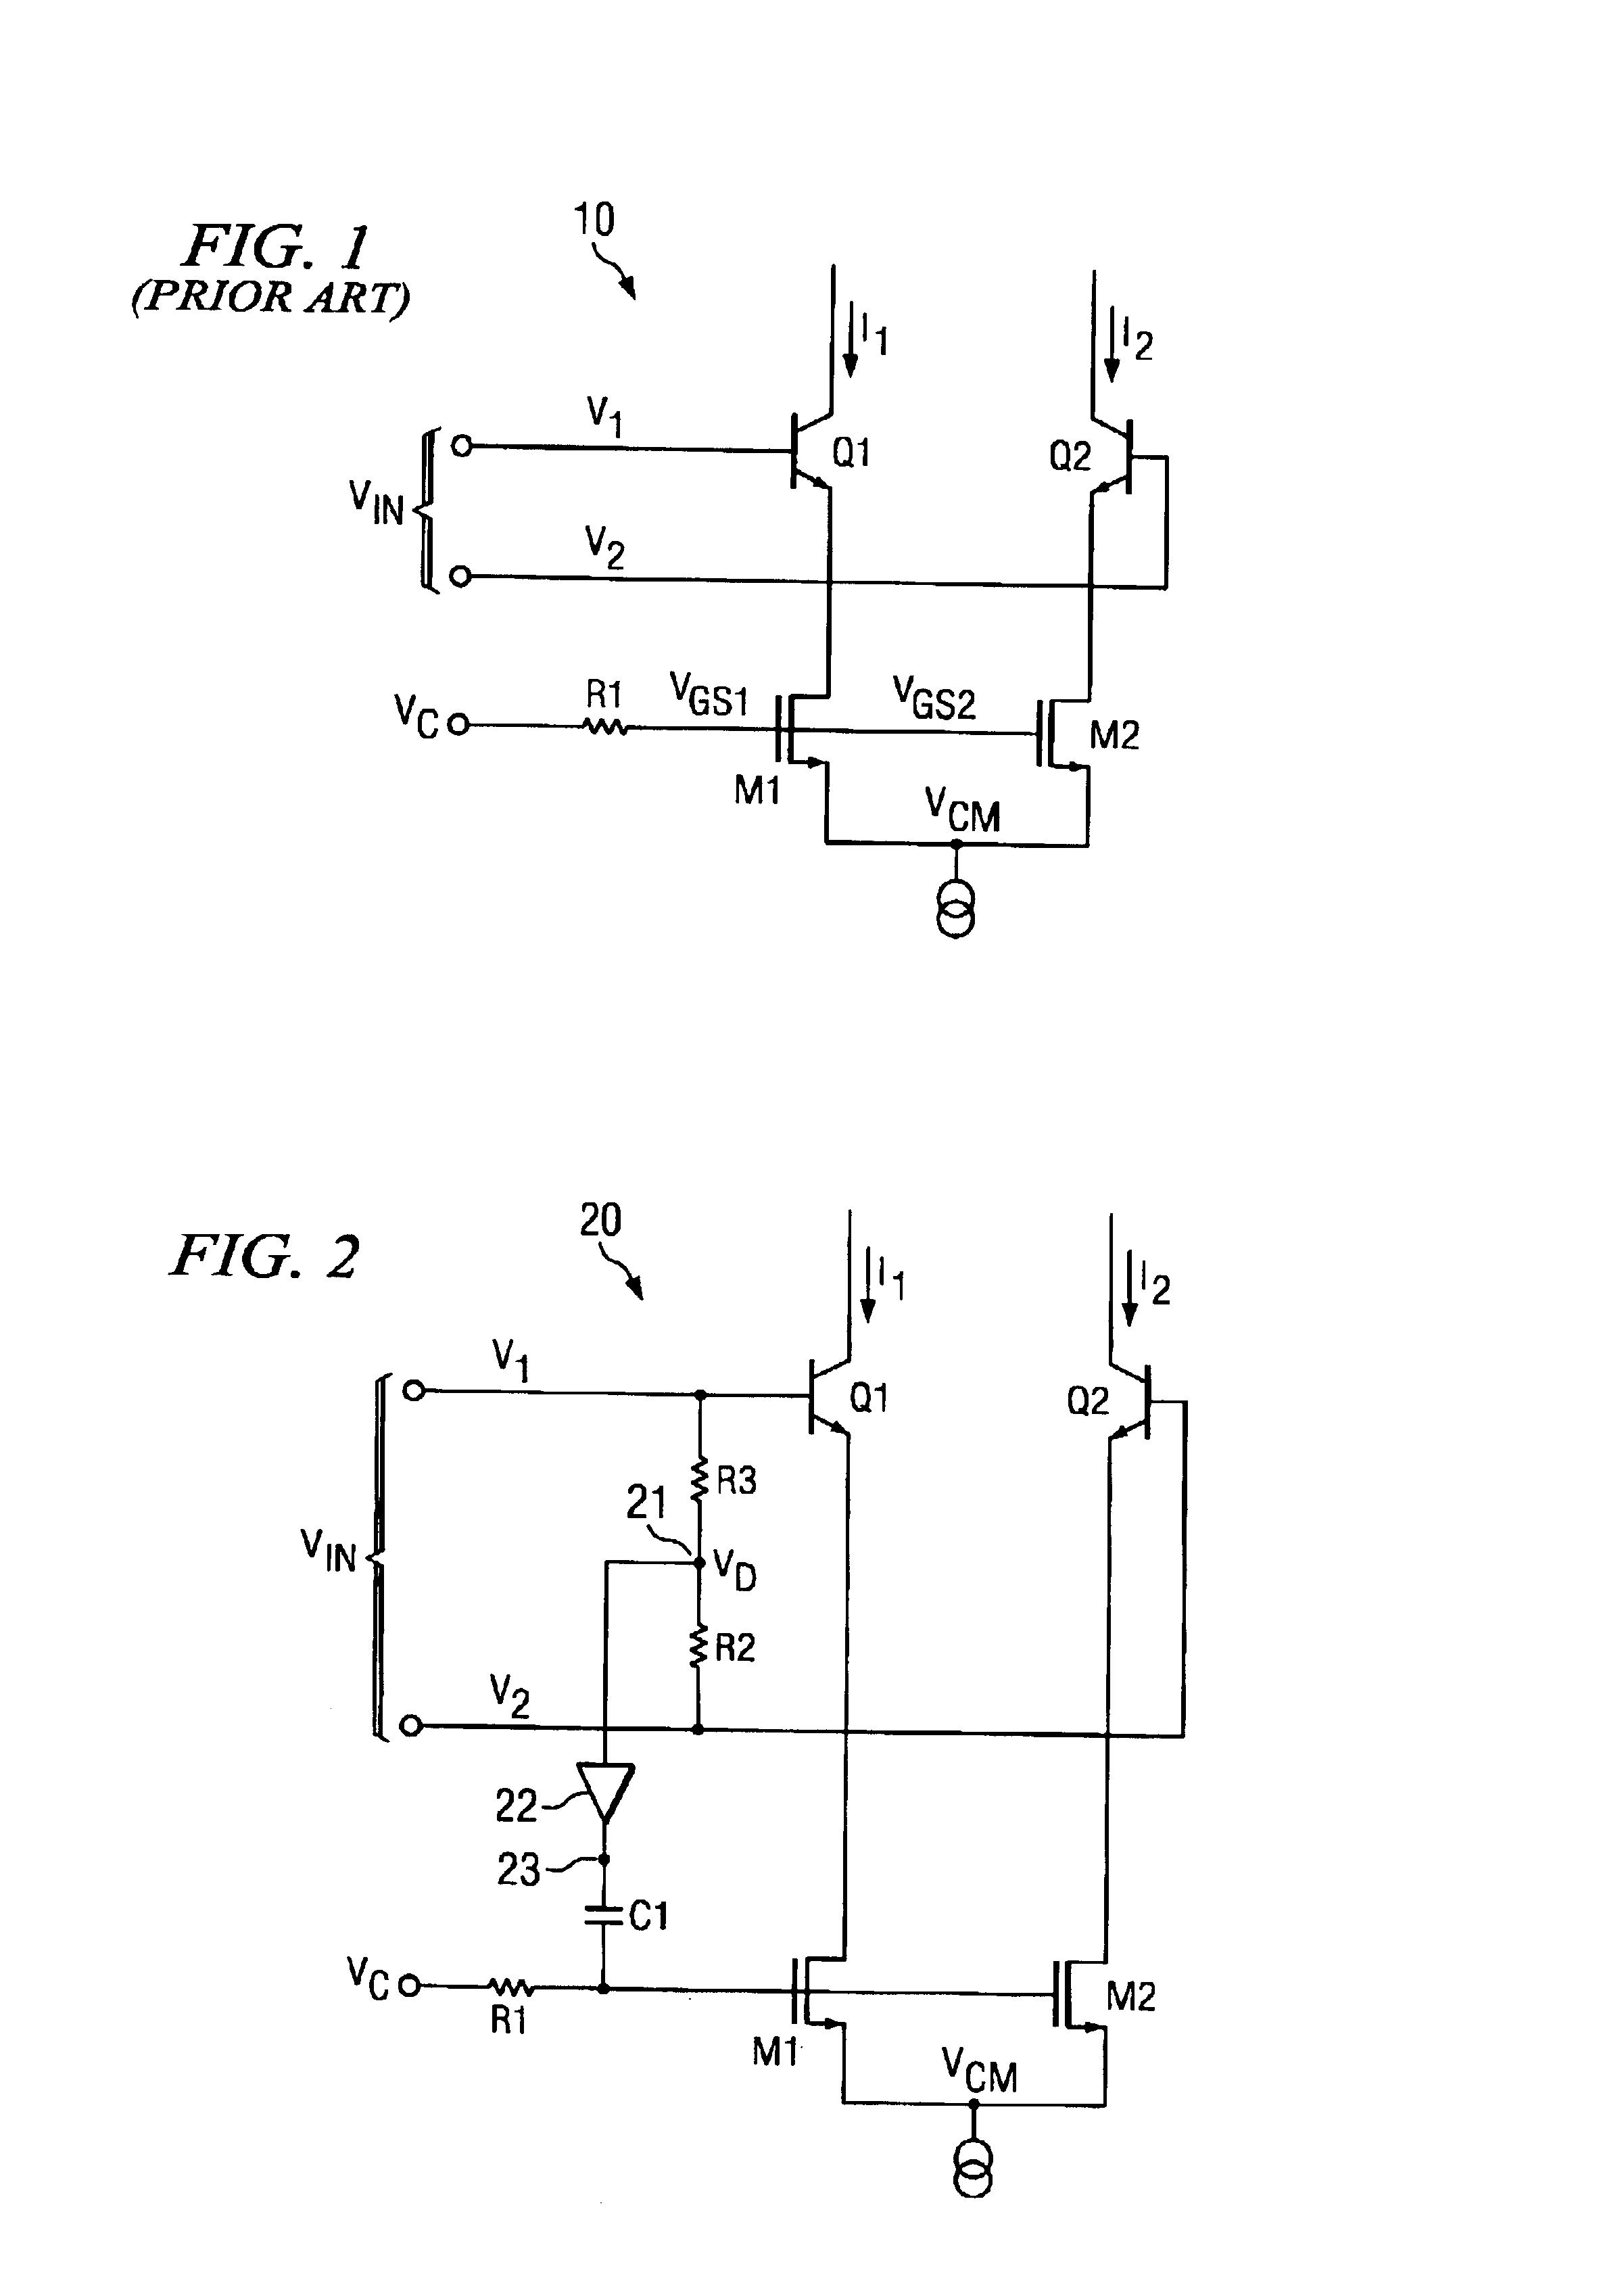 System and method for reducing second order distortion in electronic circuits